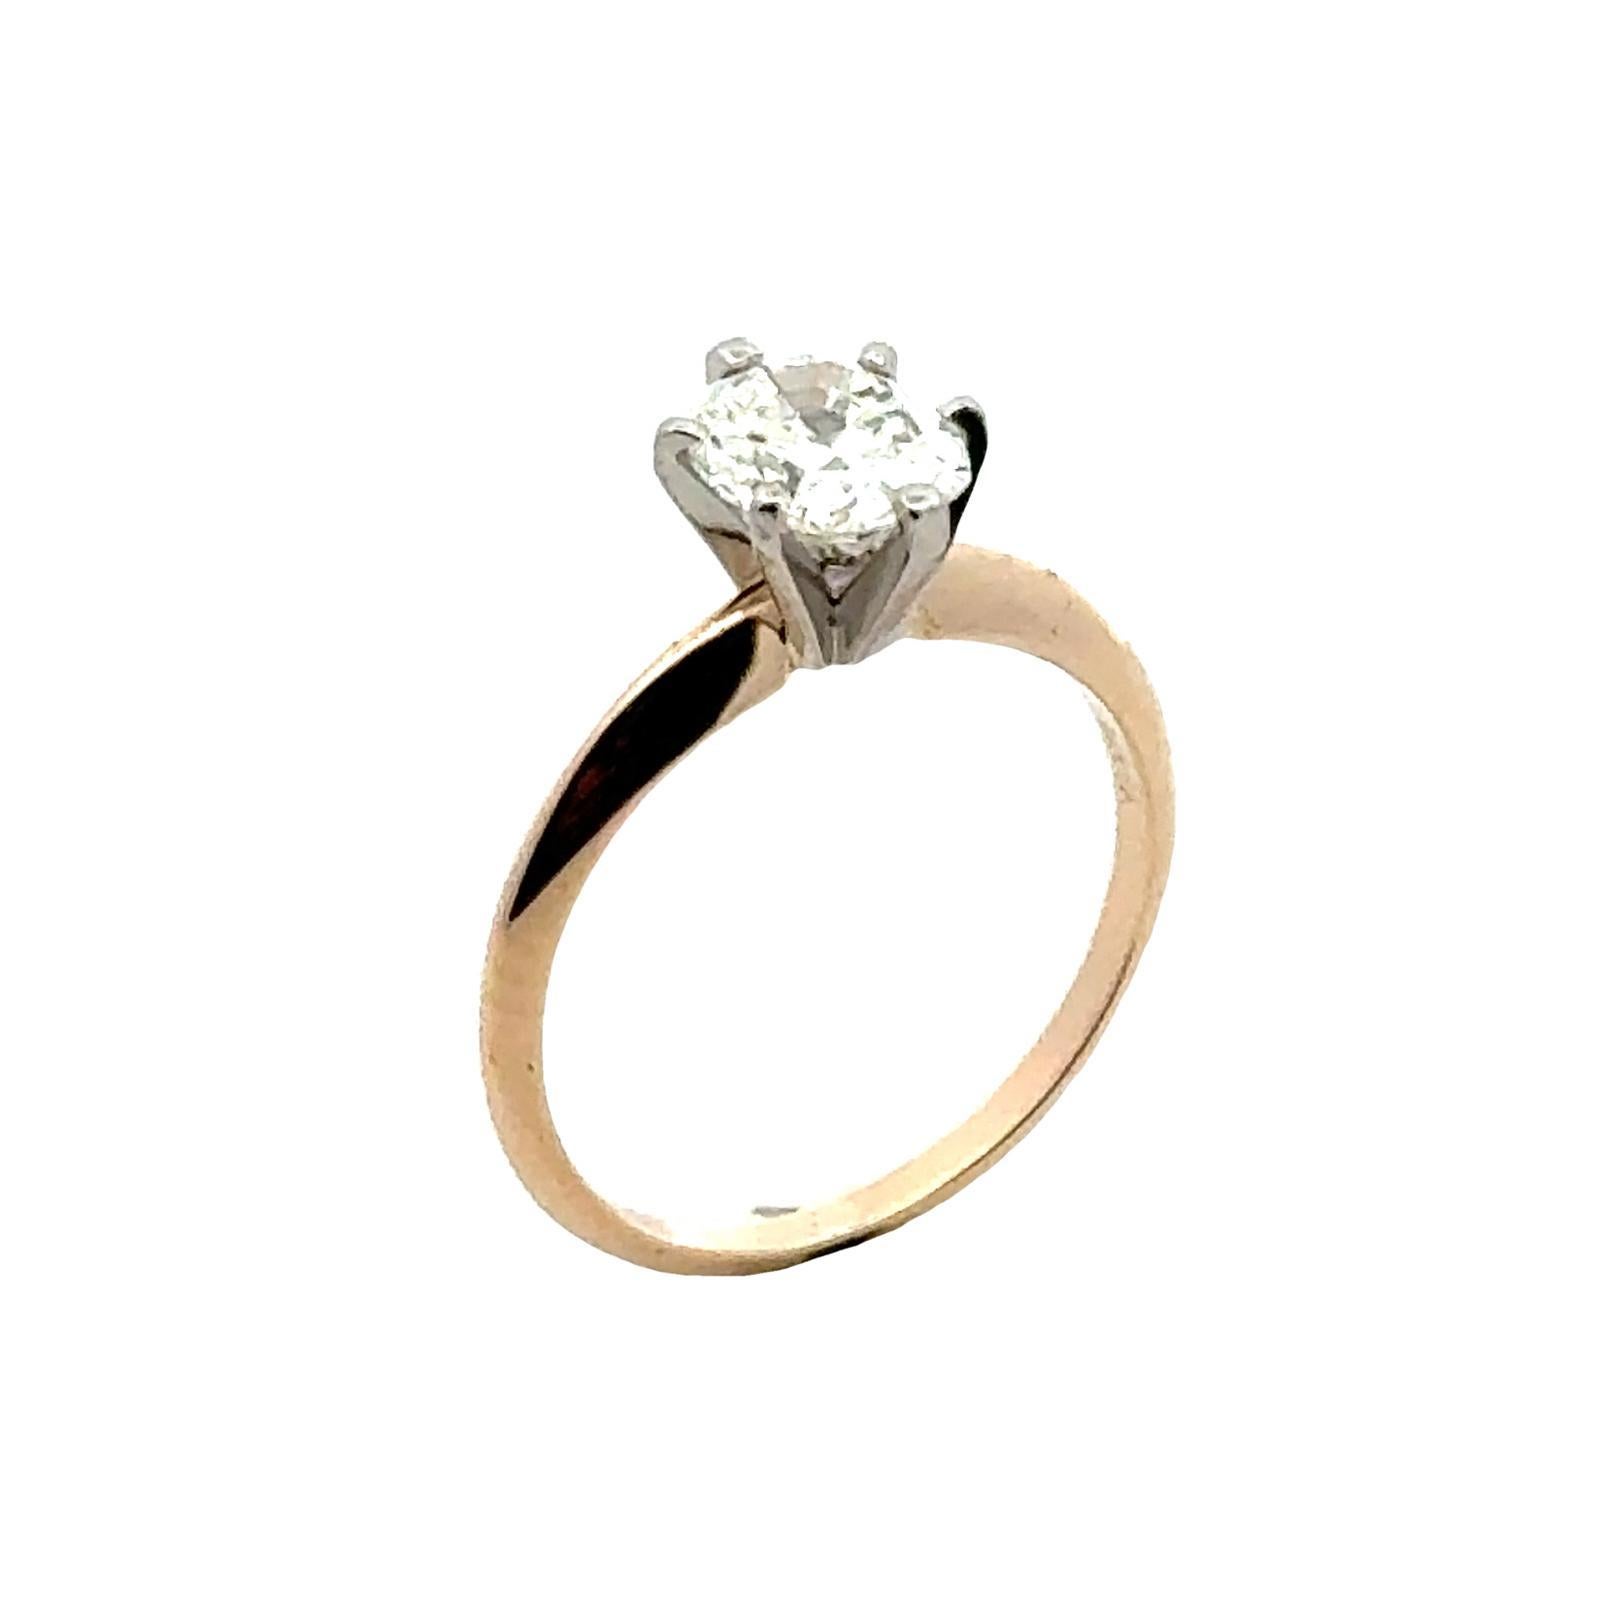 Oval Diamond 14 Karat Yellow Gold Solitaire Engagement Ring GIA Certified In Excellent Condition For Sale In Boca Raton, FL